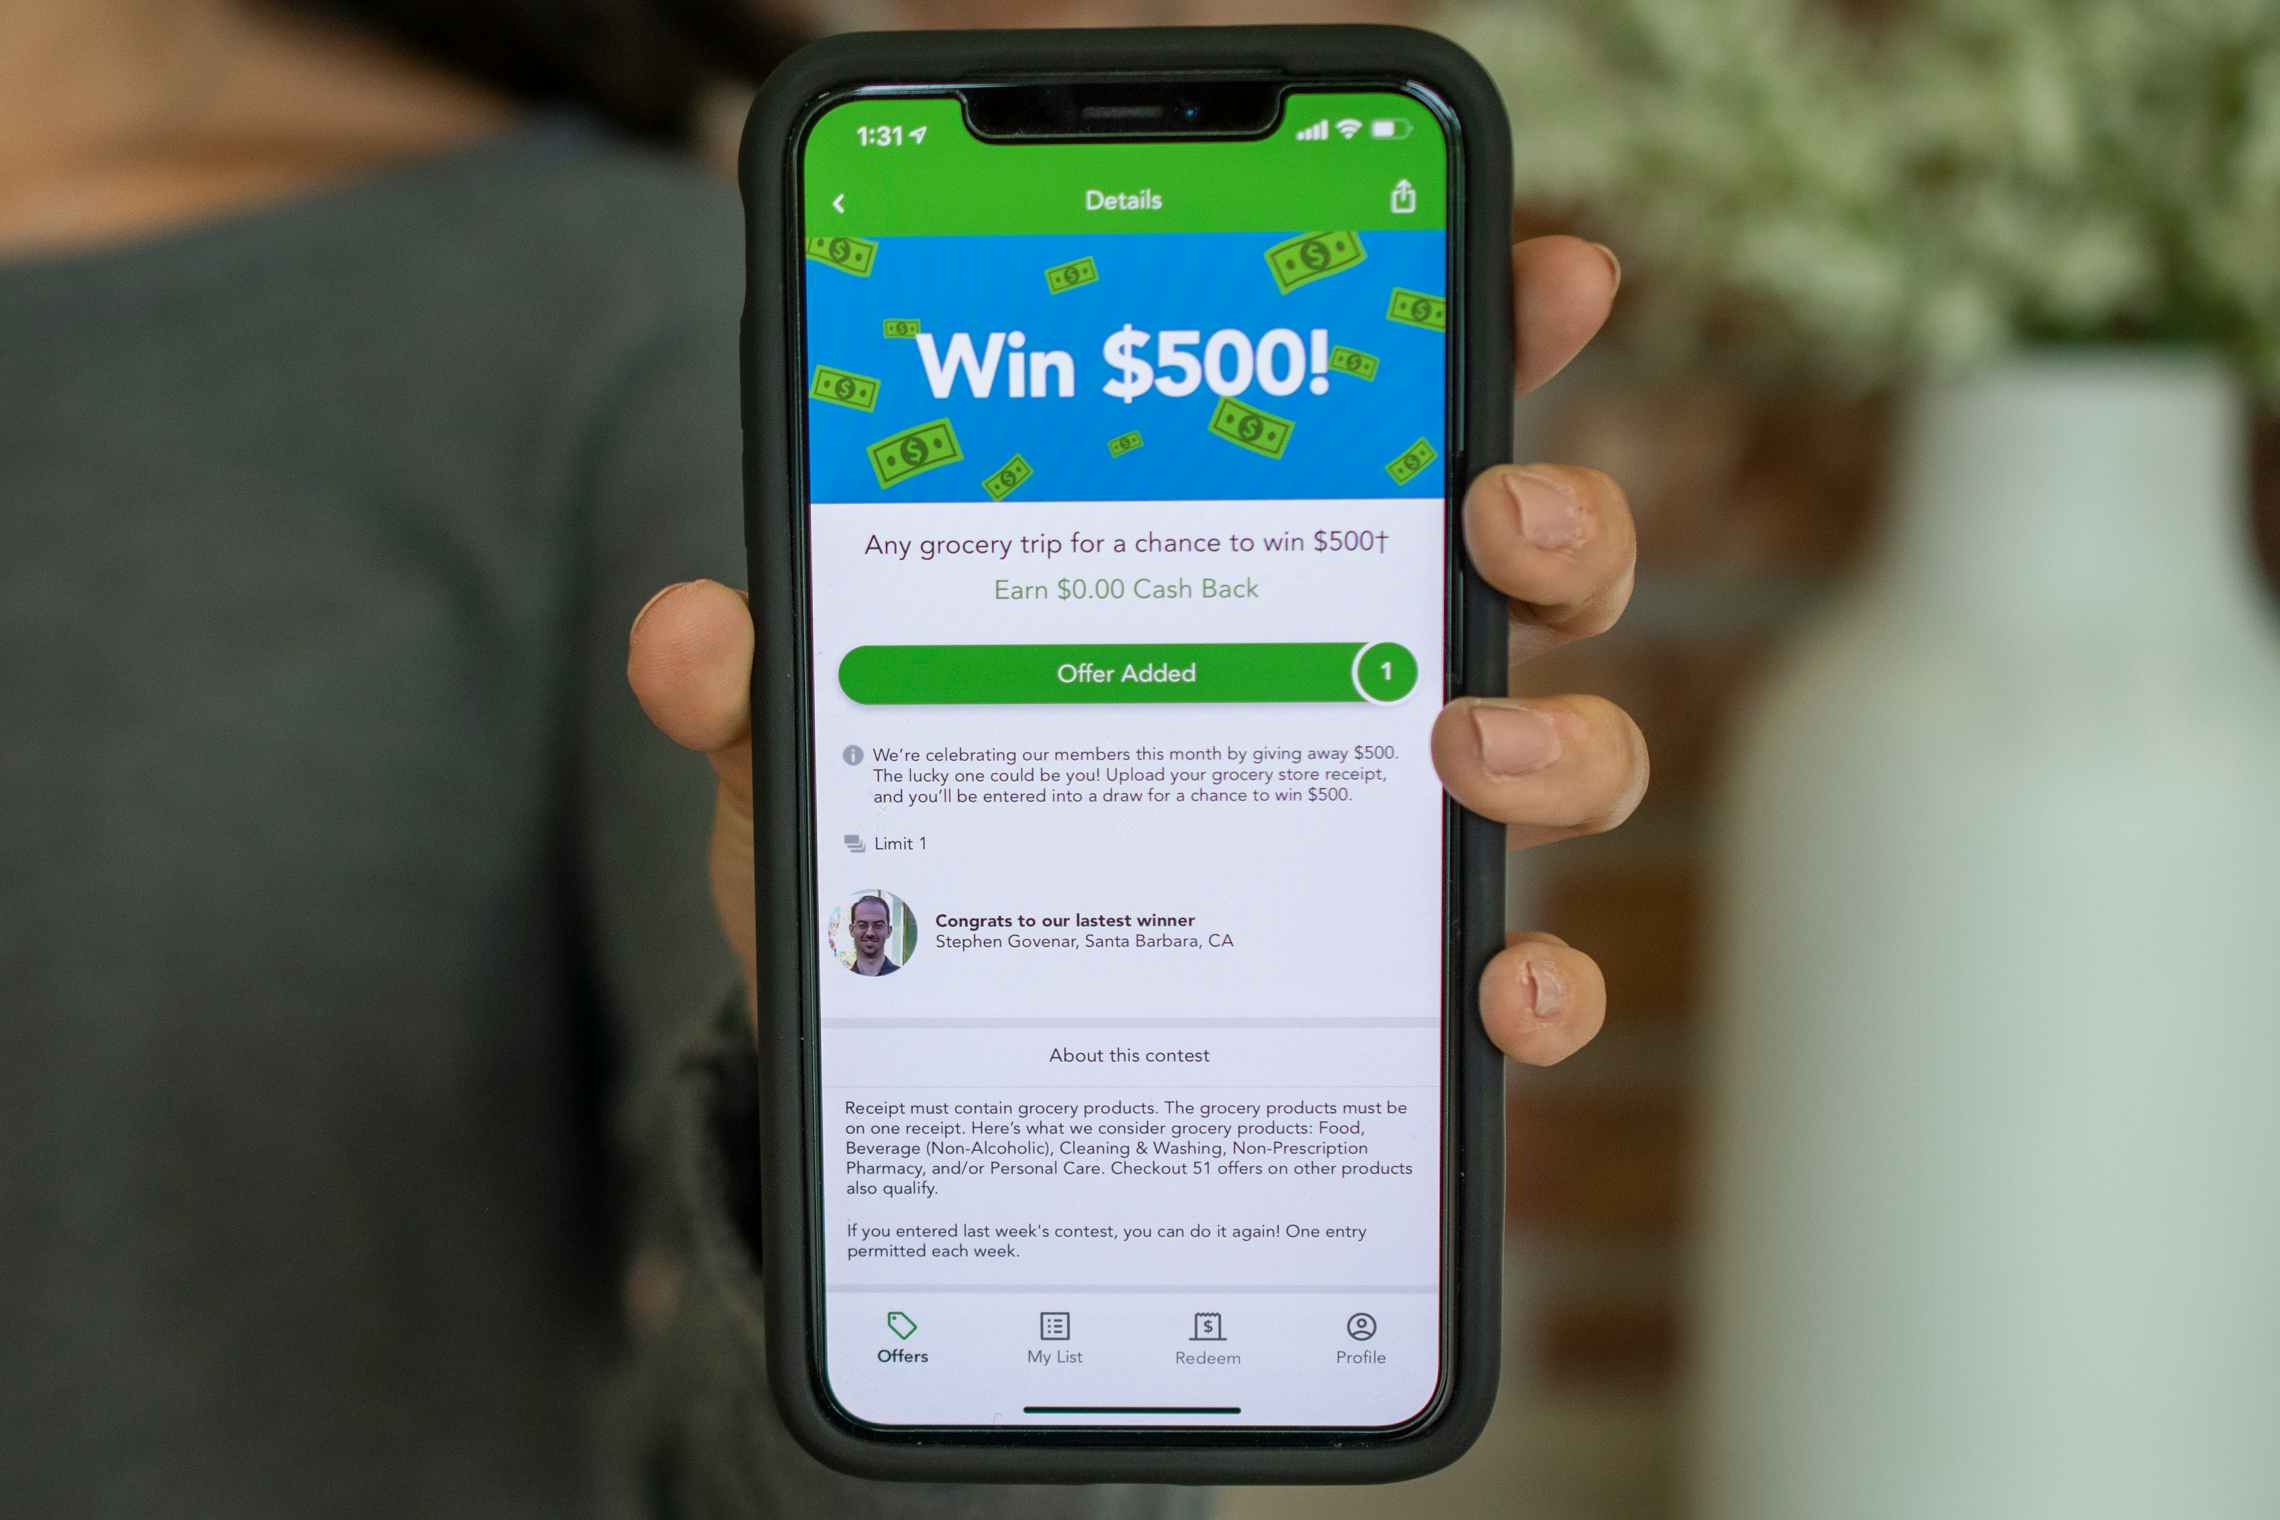 An offer to win $500 on the checkout 51 app.